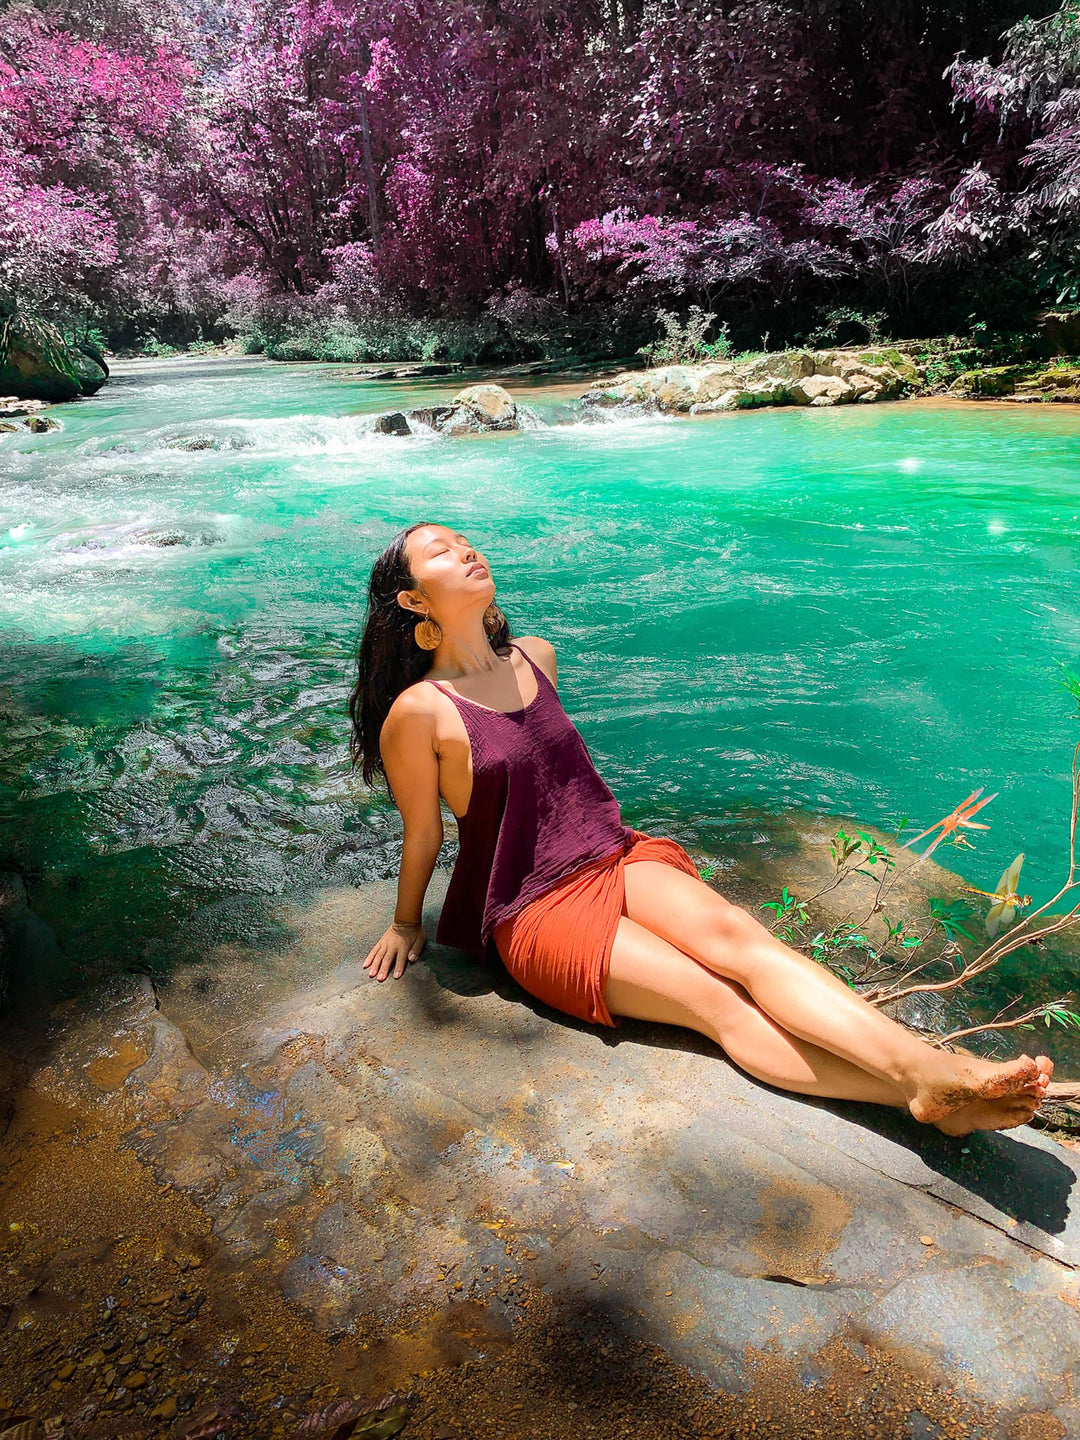 Woman has red wrap tied as a sarong skirt paired with purple tank top. She relaxes on a rock by turquoise water.